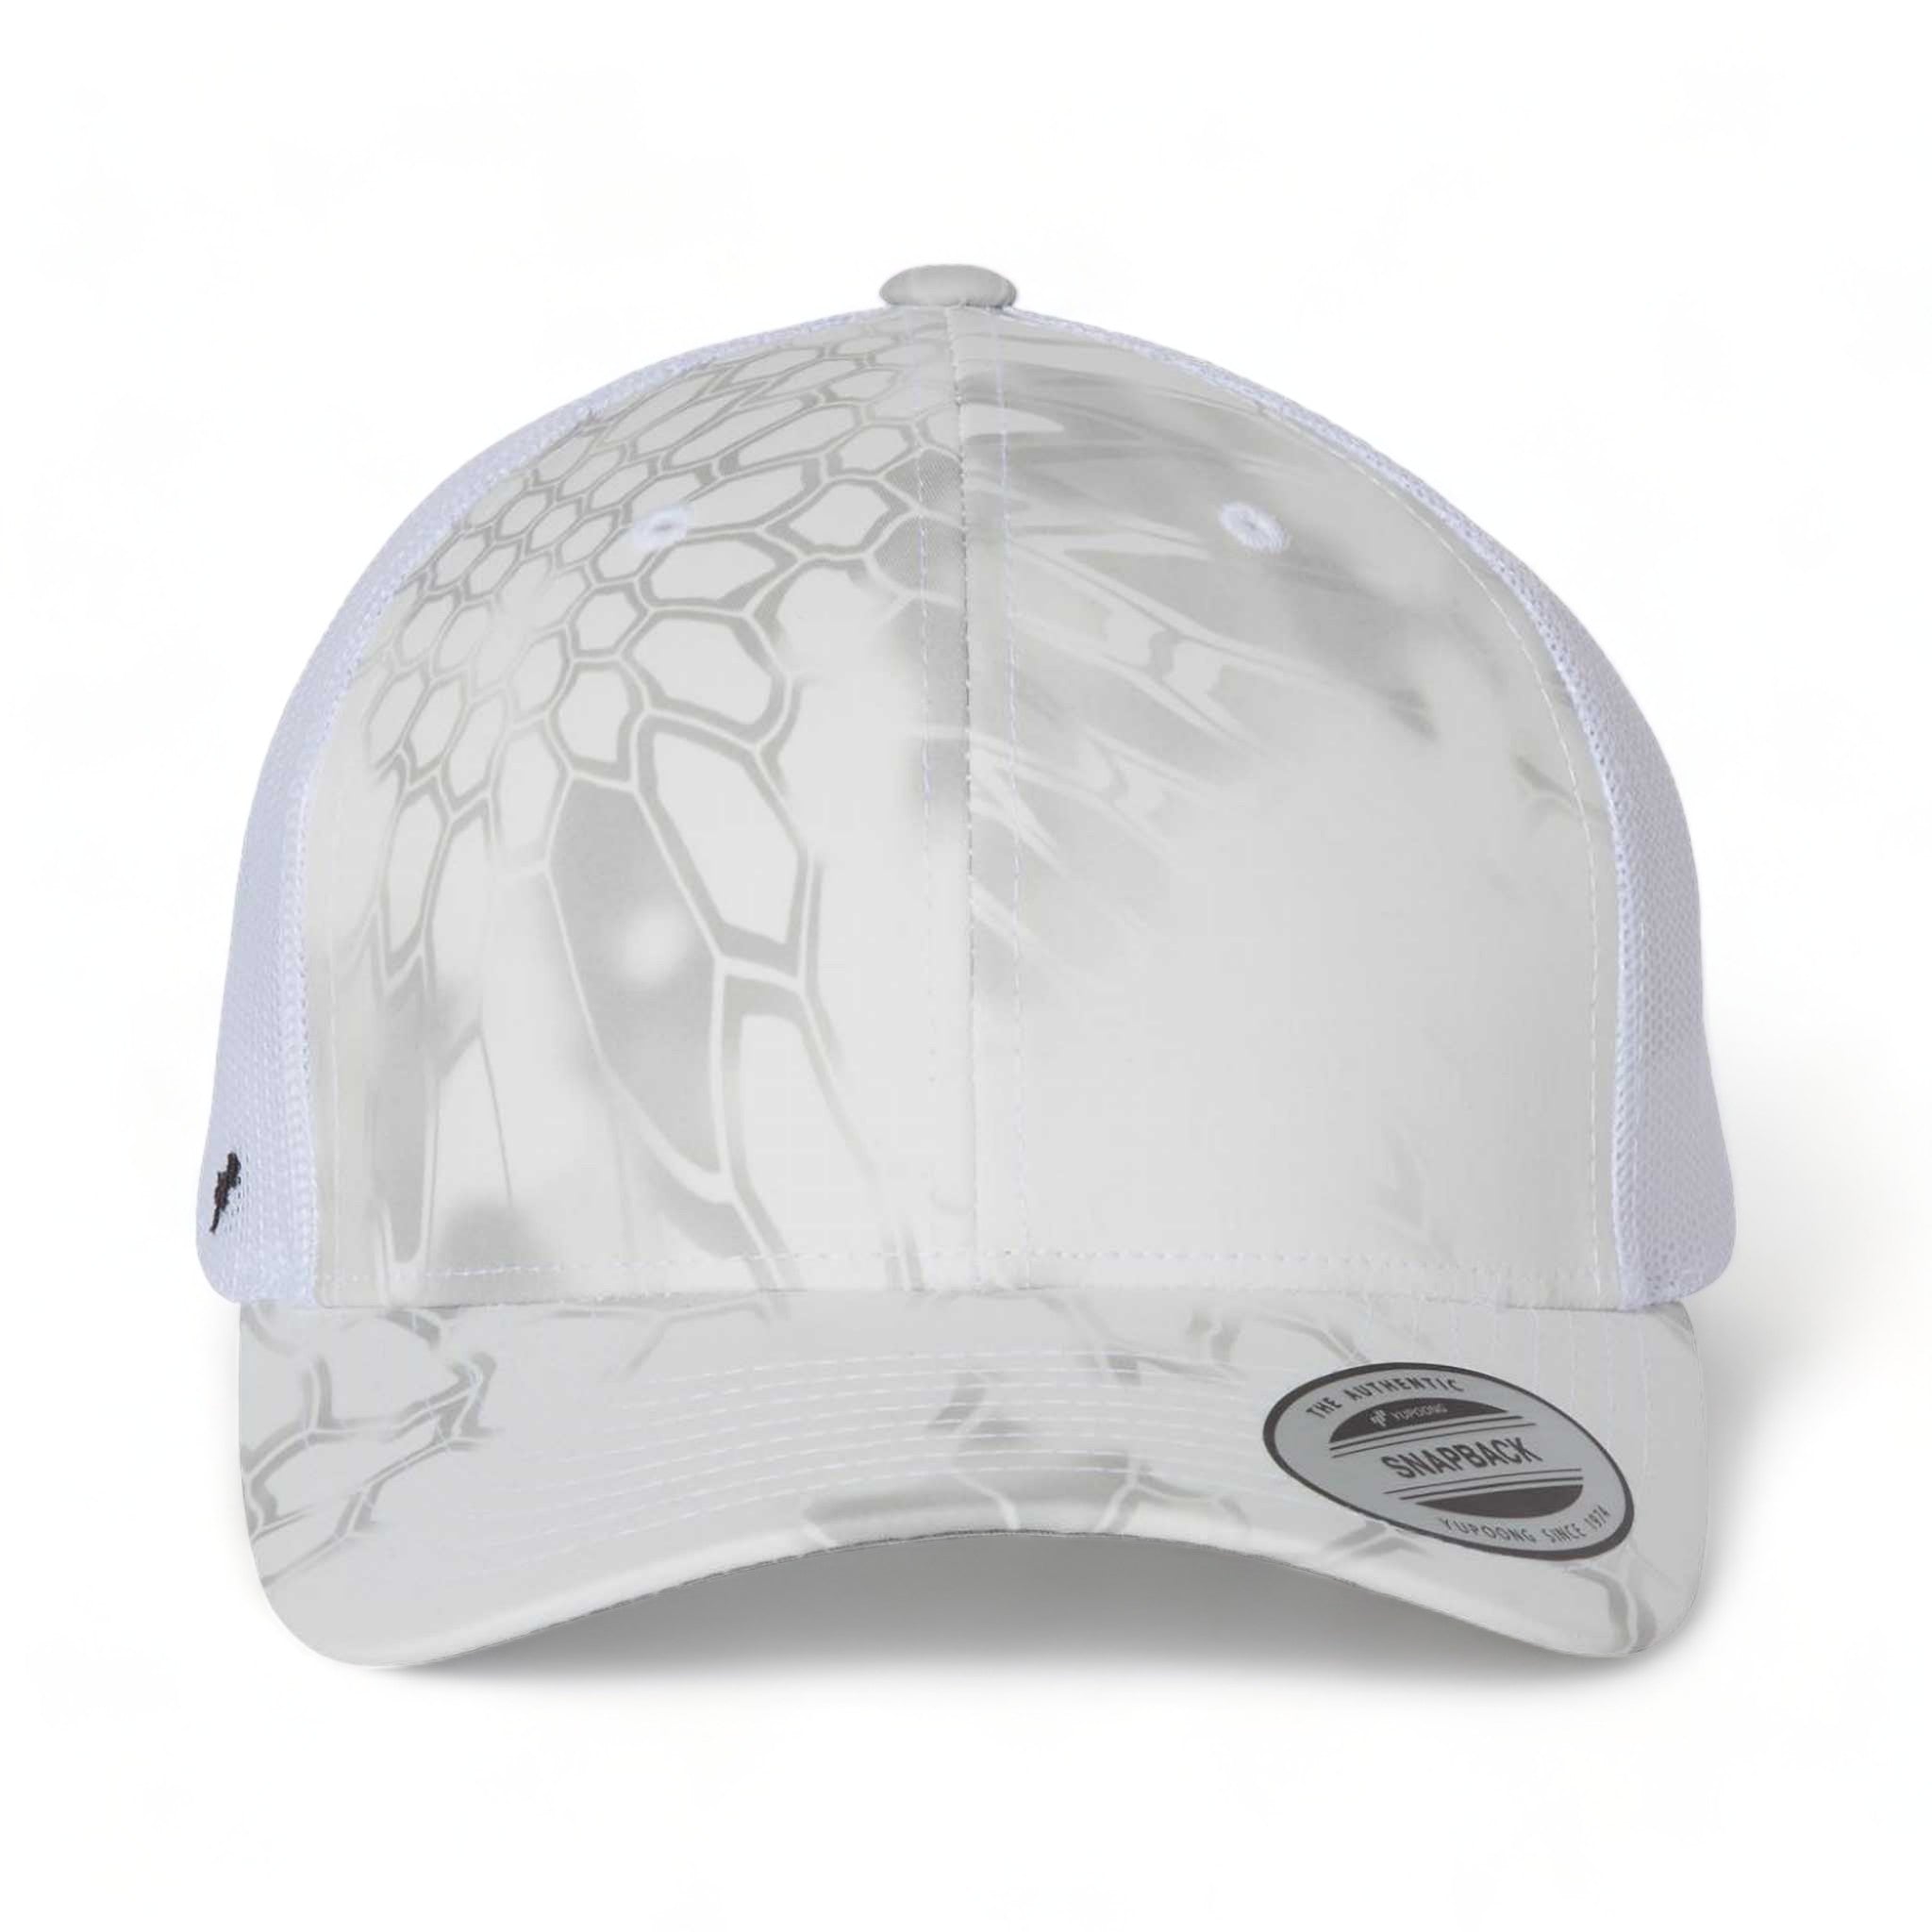 Front view of YP Classics 6606 custom hat in kryptek wraith